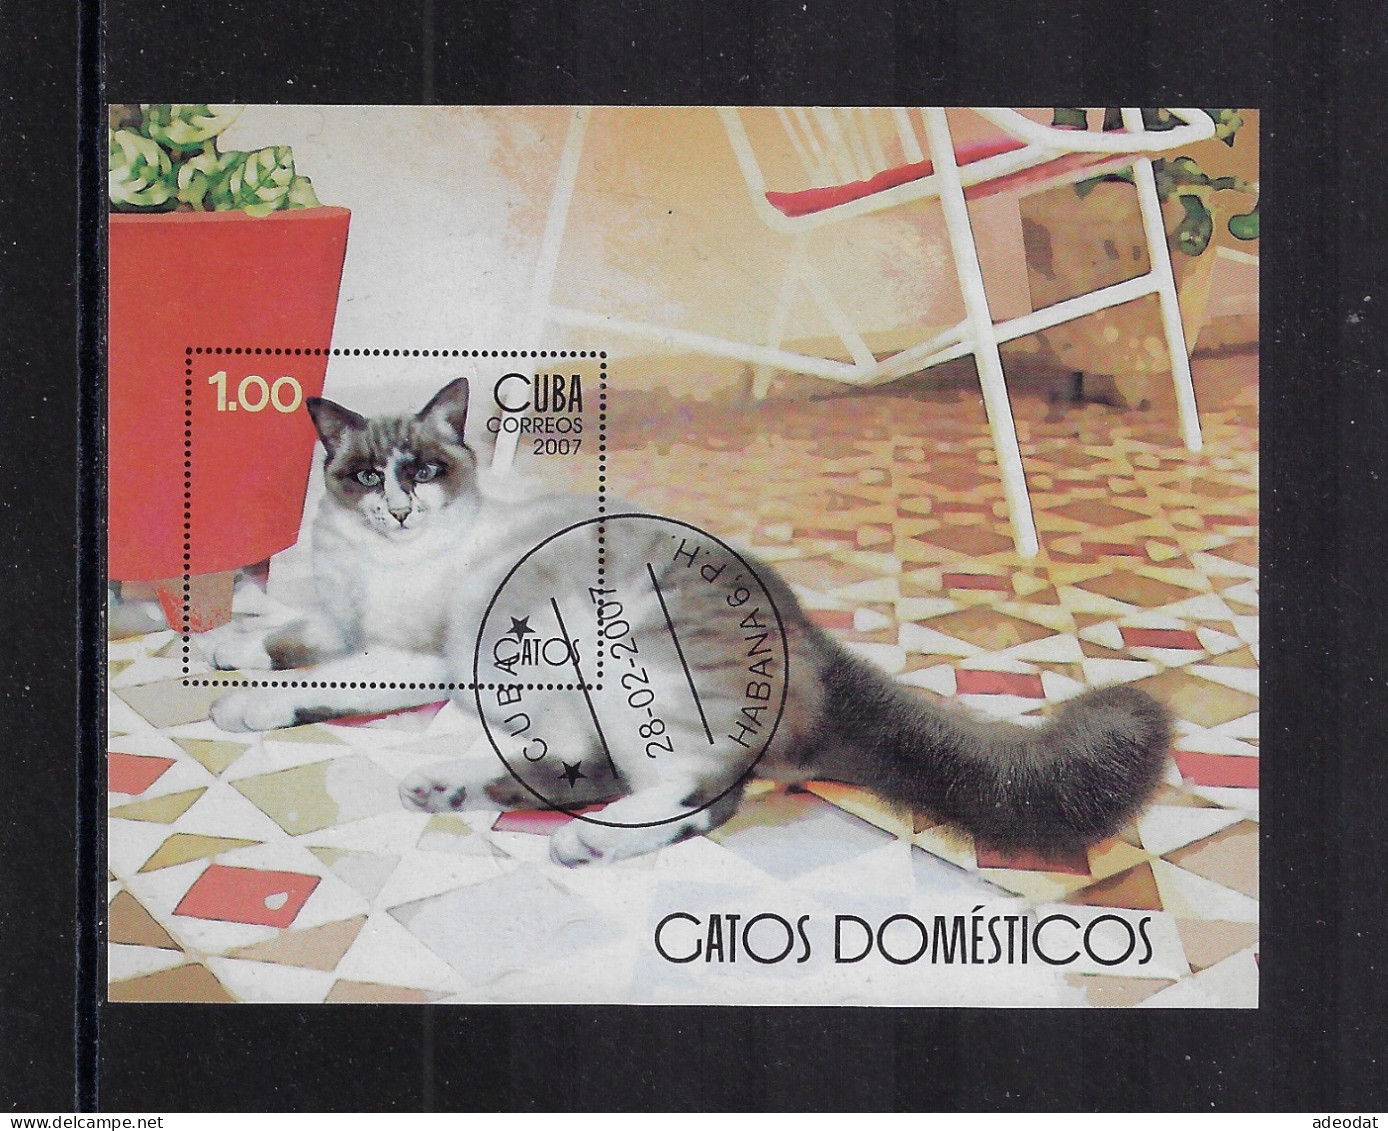 CUBA 2007 CATS SCOTT 4679 CANCELLED - Used Stamps